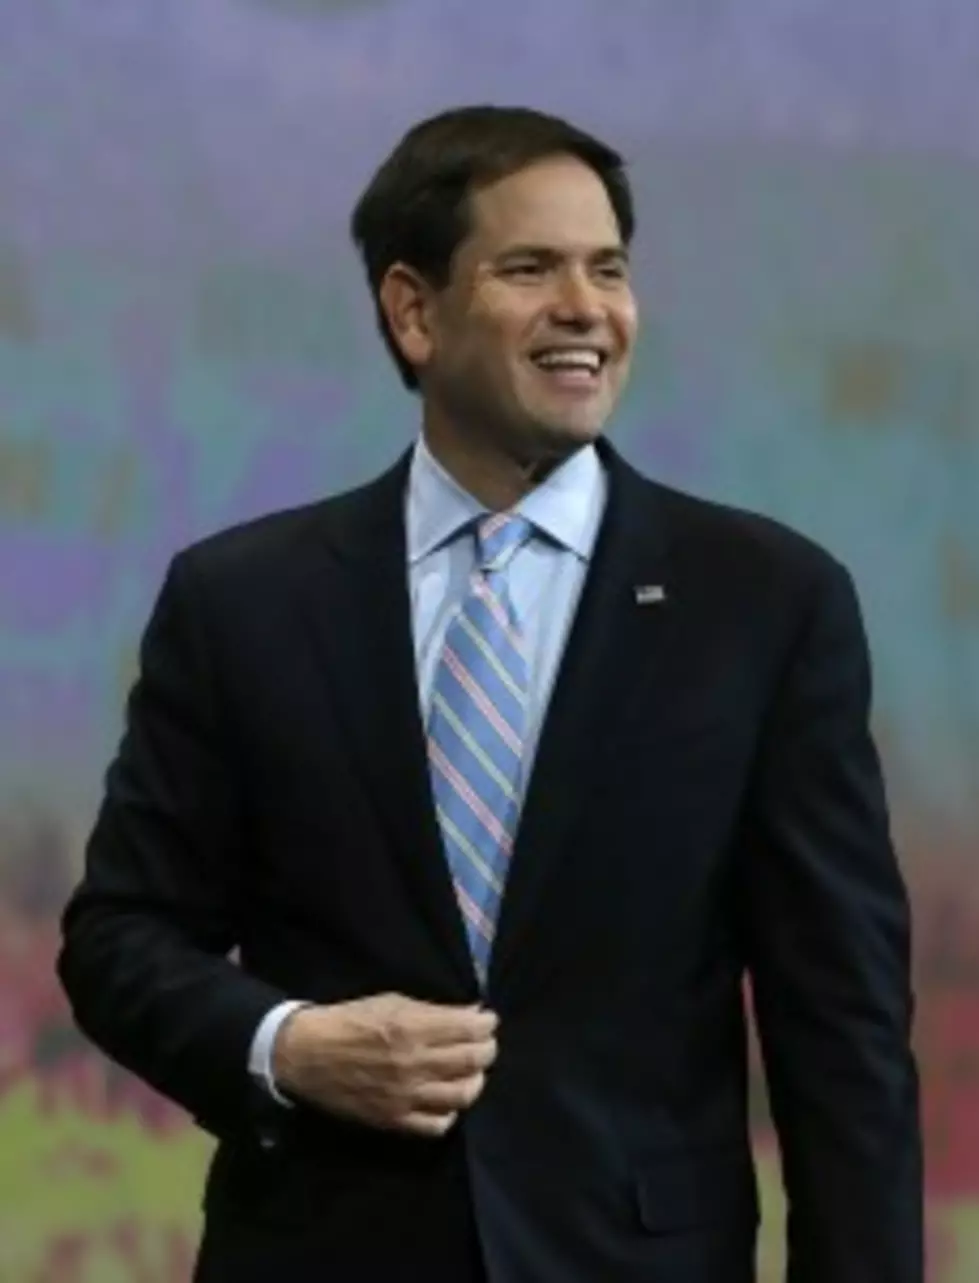 Rubio Speaks in Idaho About Challenges in America